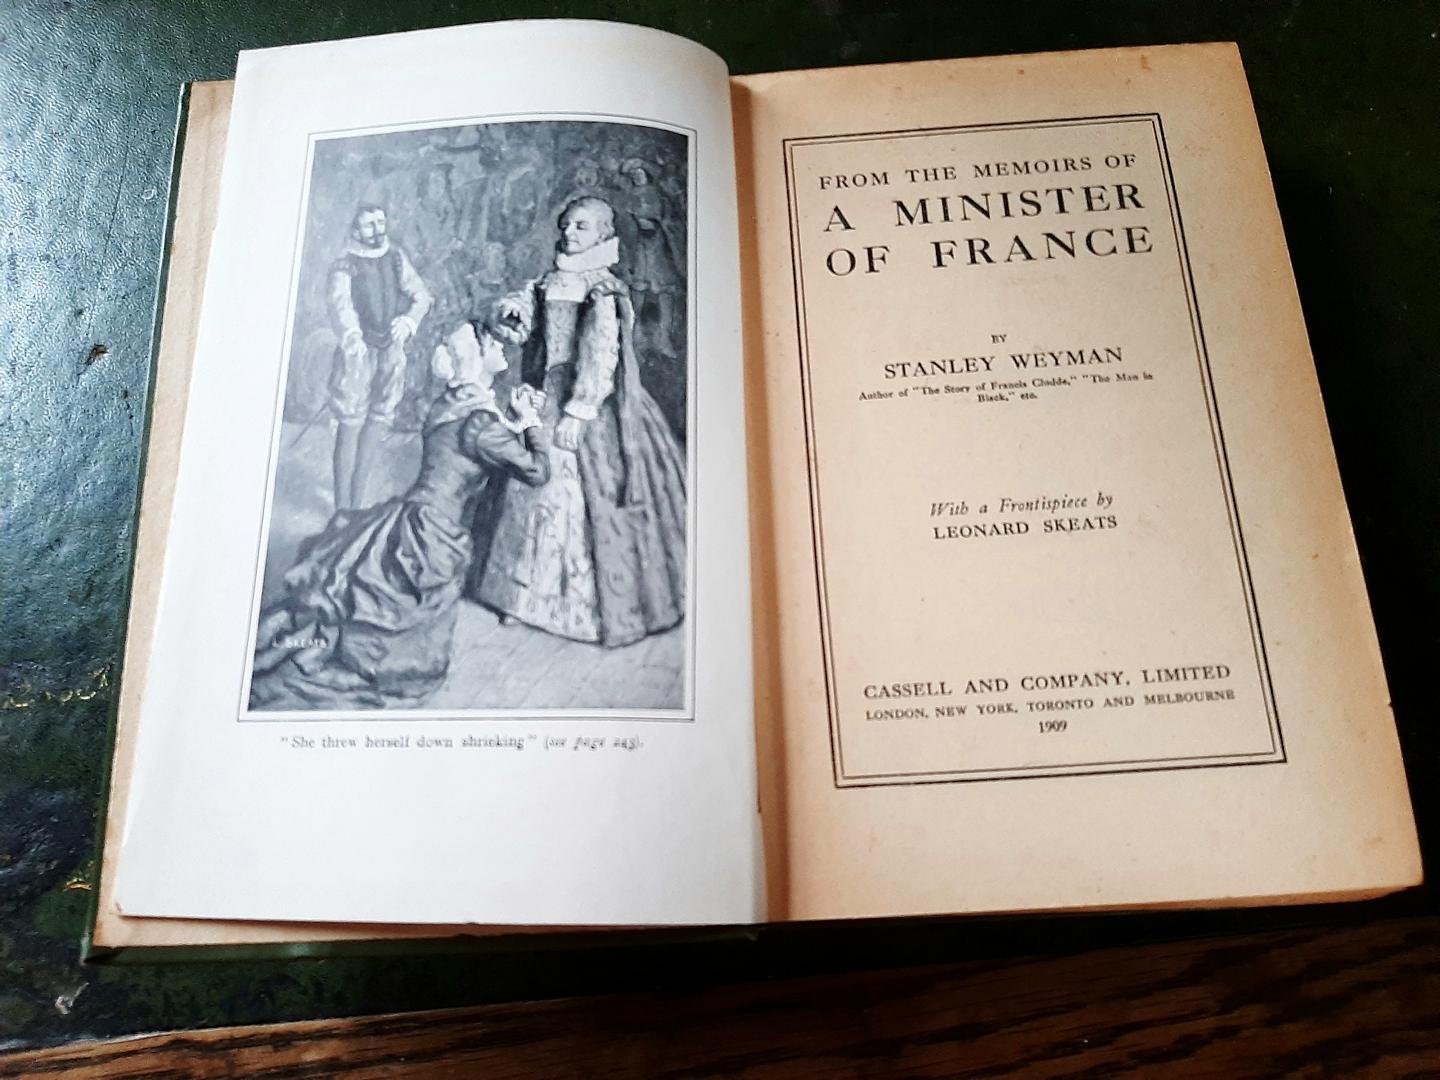 Weyman, Stanley / Skeats, Leonard, frontispiece - From the Memoirs of a Minister of France